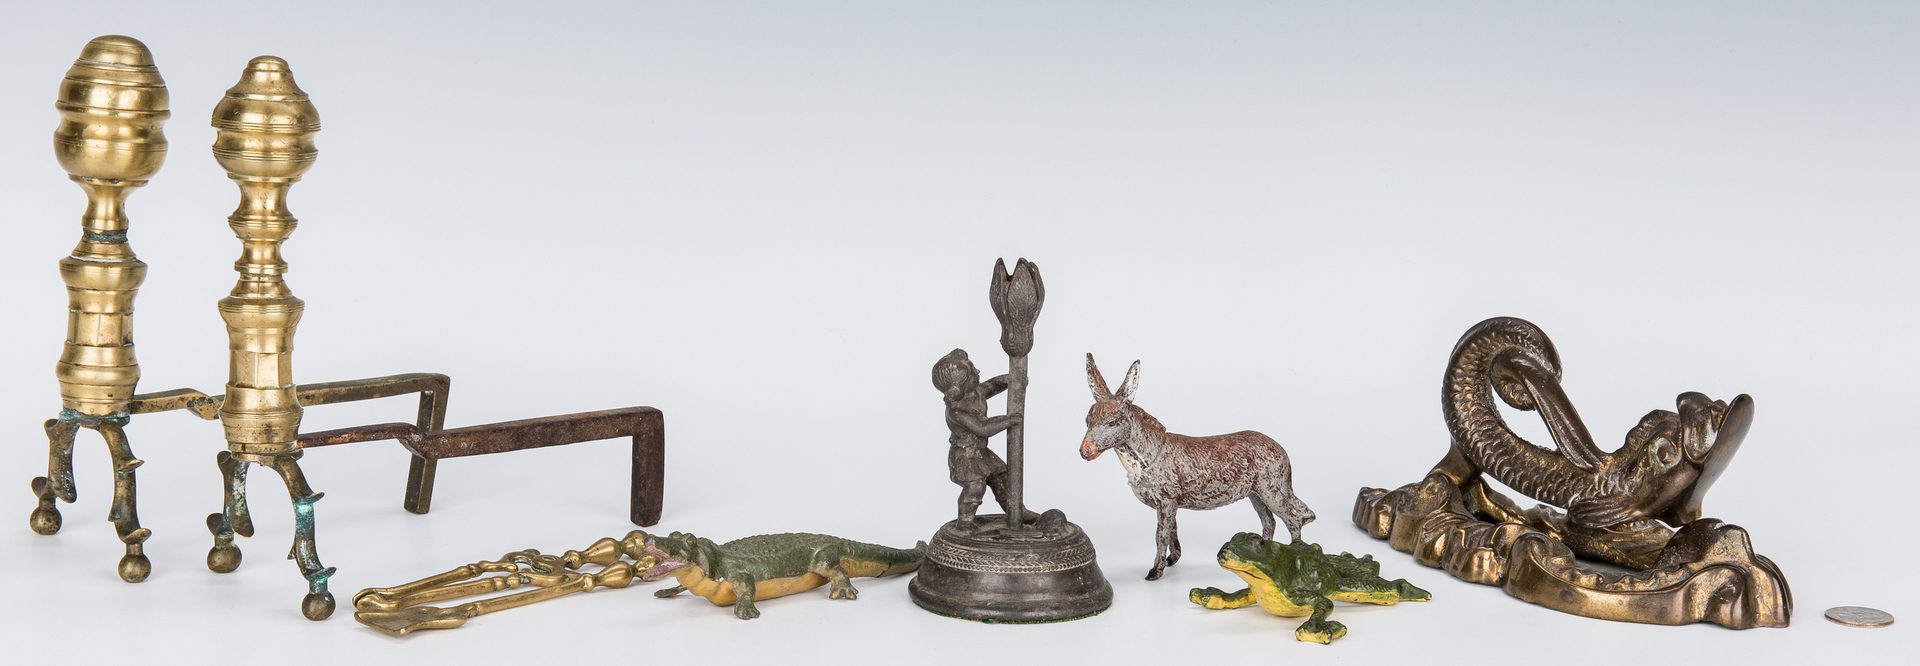 Lot 55: Group of Brass & Iron Items, incl. miniatures